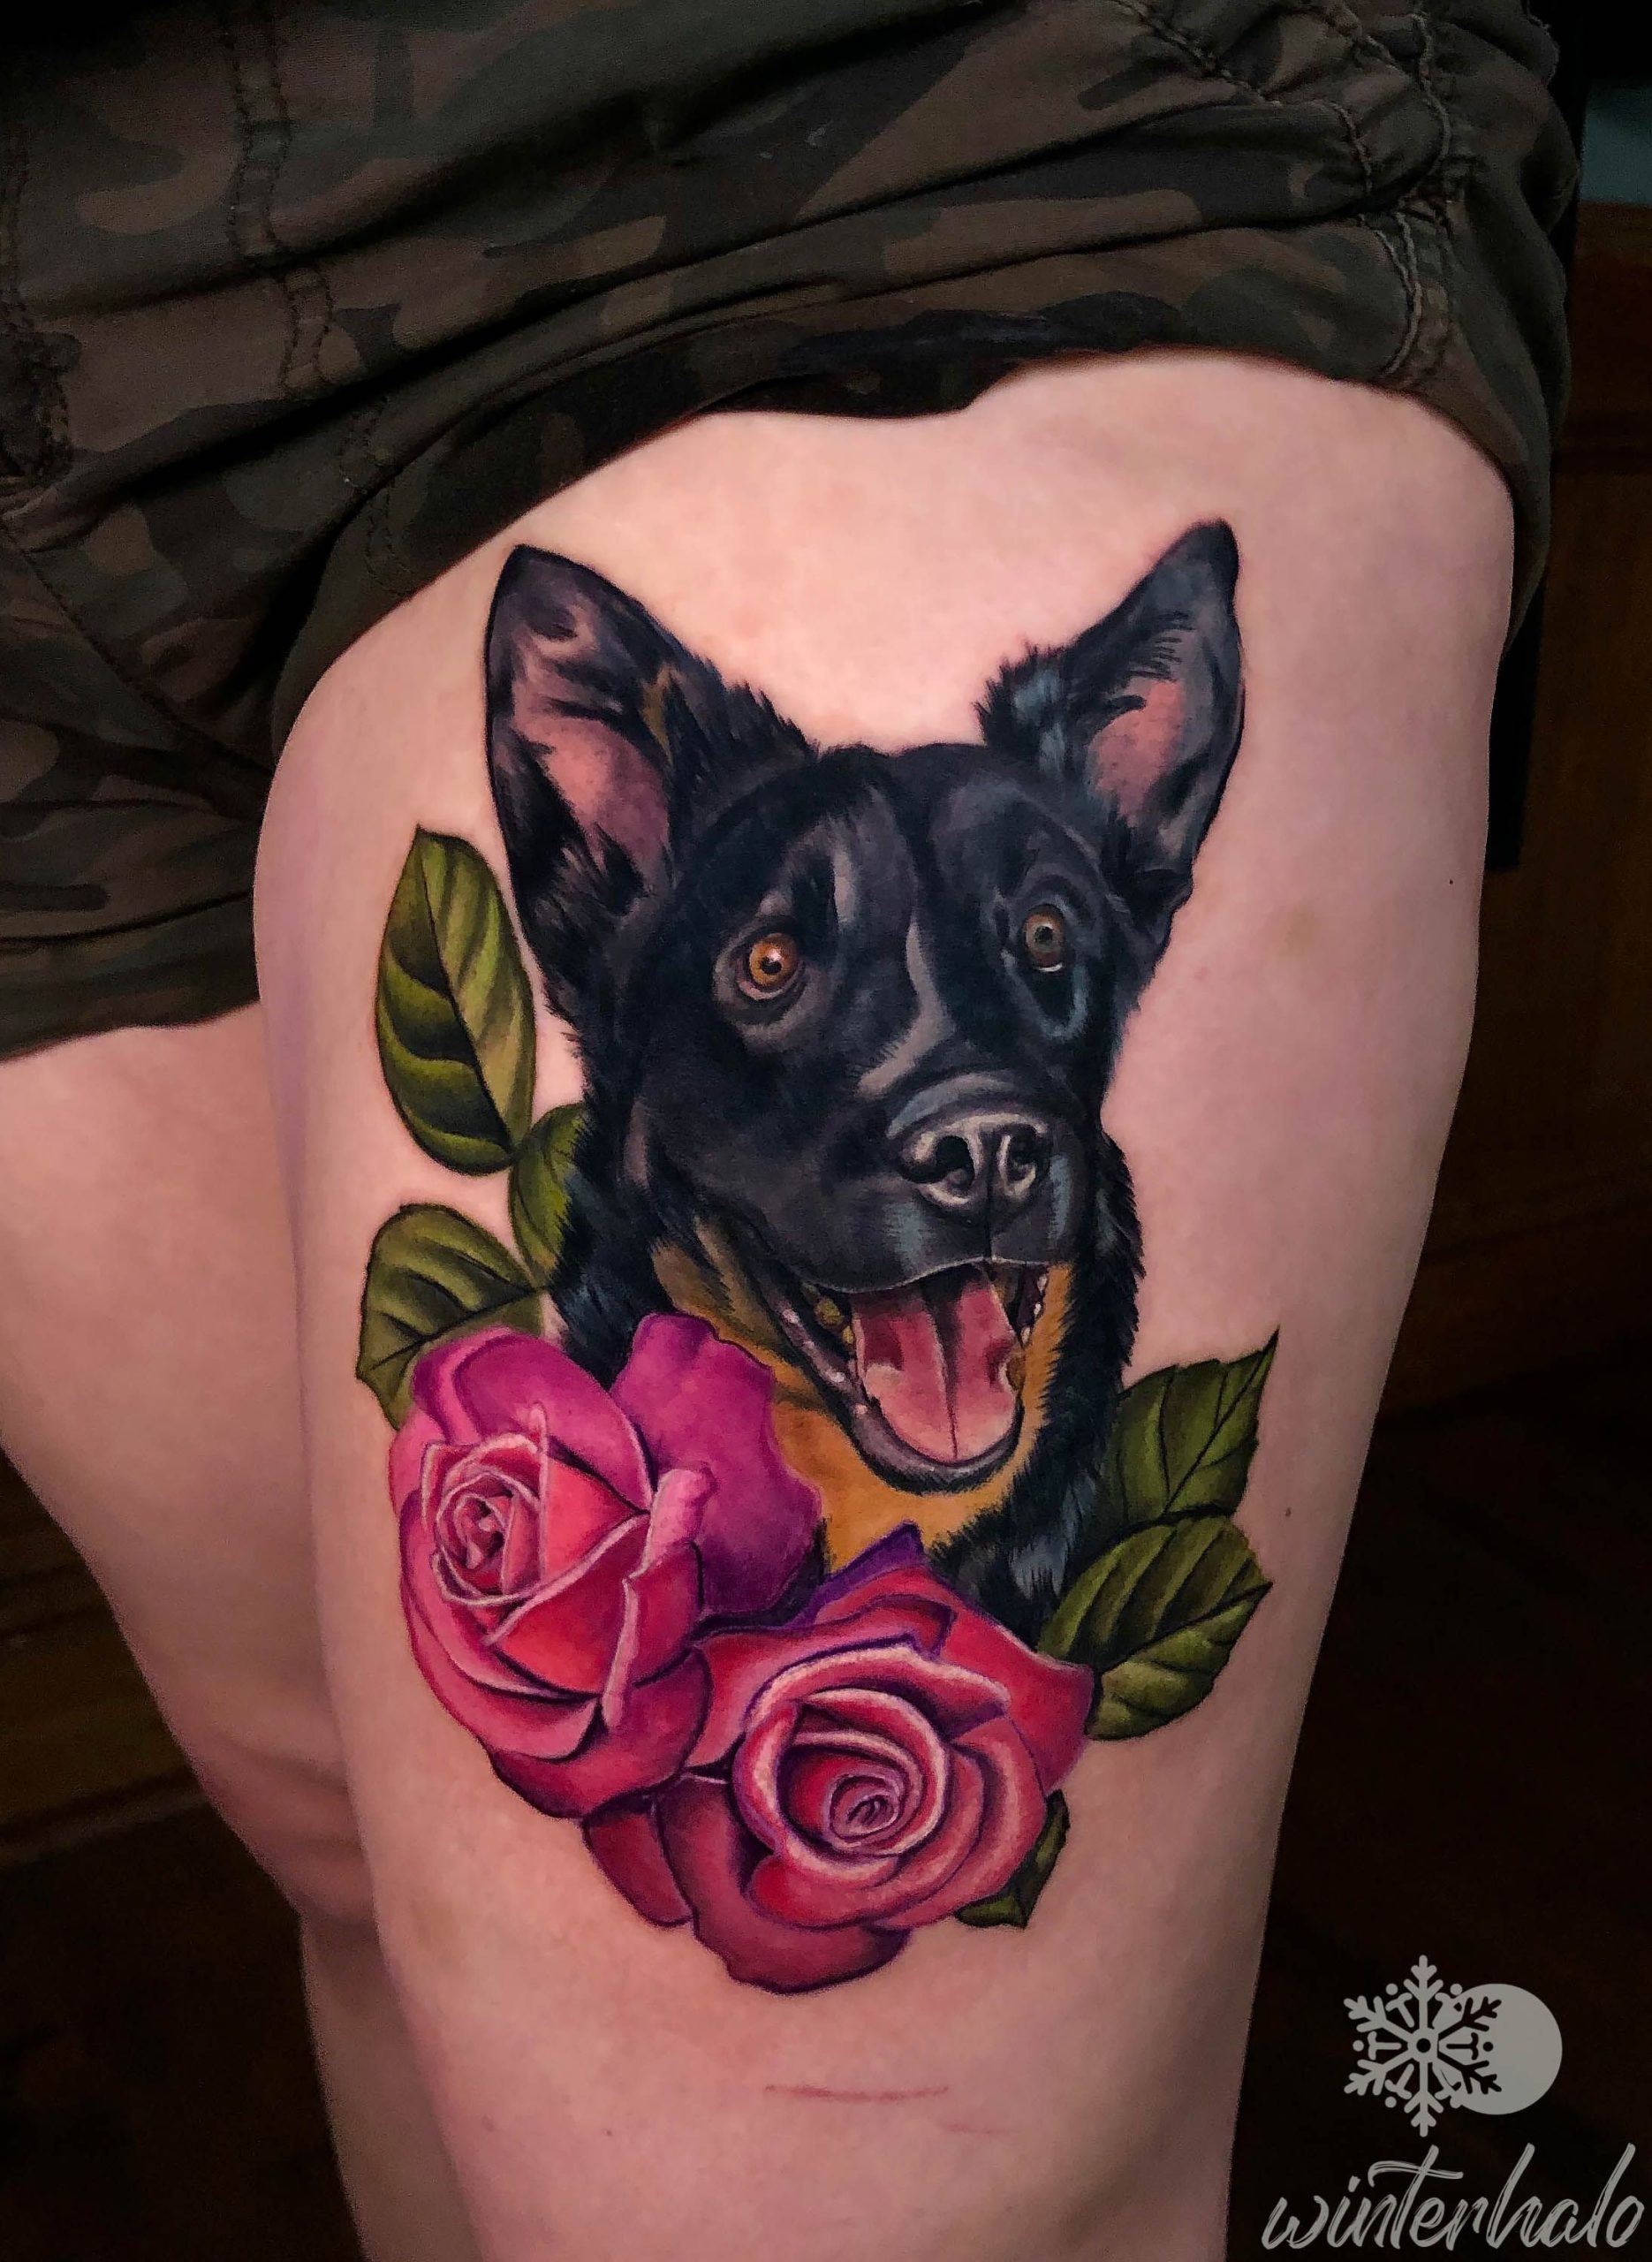 5. Pretty Roses and a Puppy Tattoo